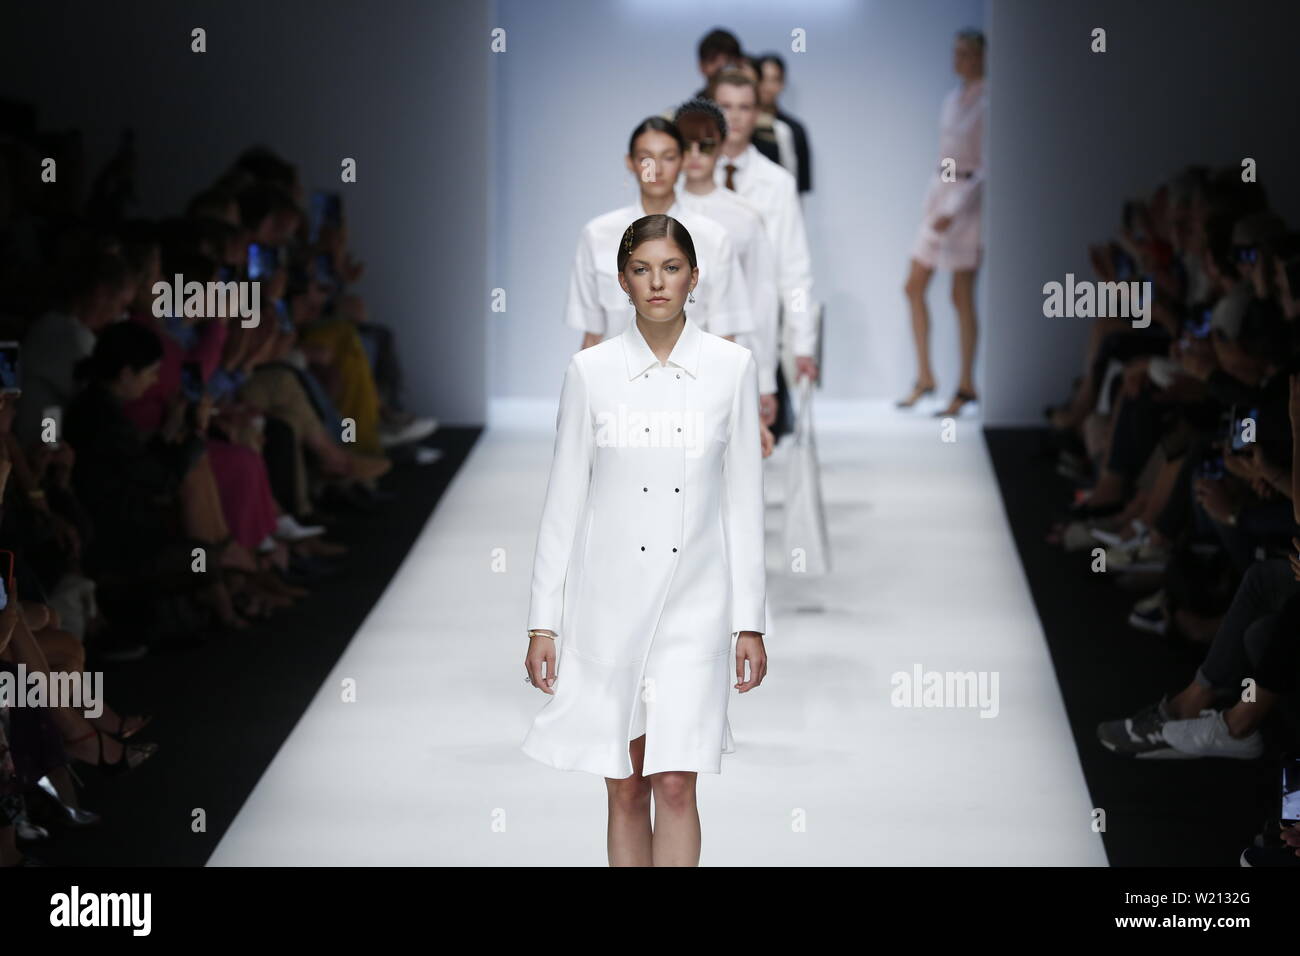 Berlin, Germany. 03rd July, 2019. The photo shows models on the catwalk with the collection spring/summer 2020 of the Designer RIANI at Mercedes-Benz Fashion Week. Credit: Simone Kuhlmey/Pacific Press/Alamy Live News Stock Photo